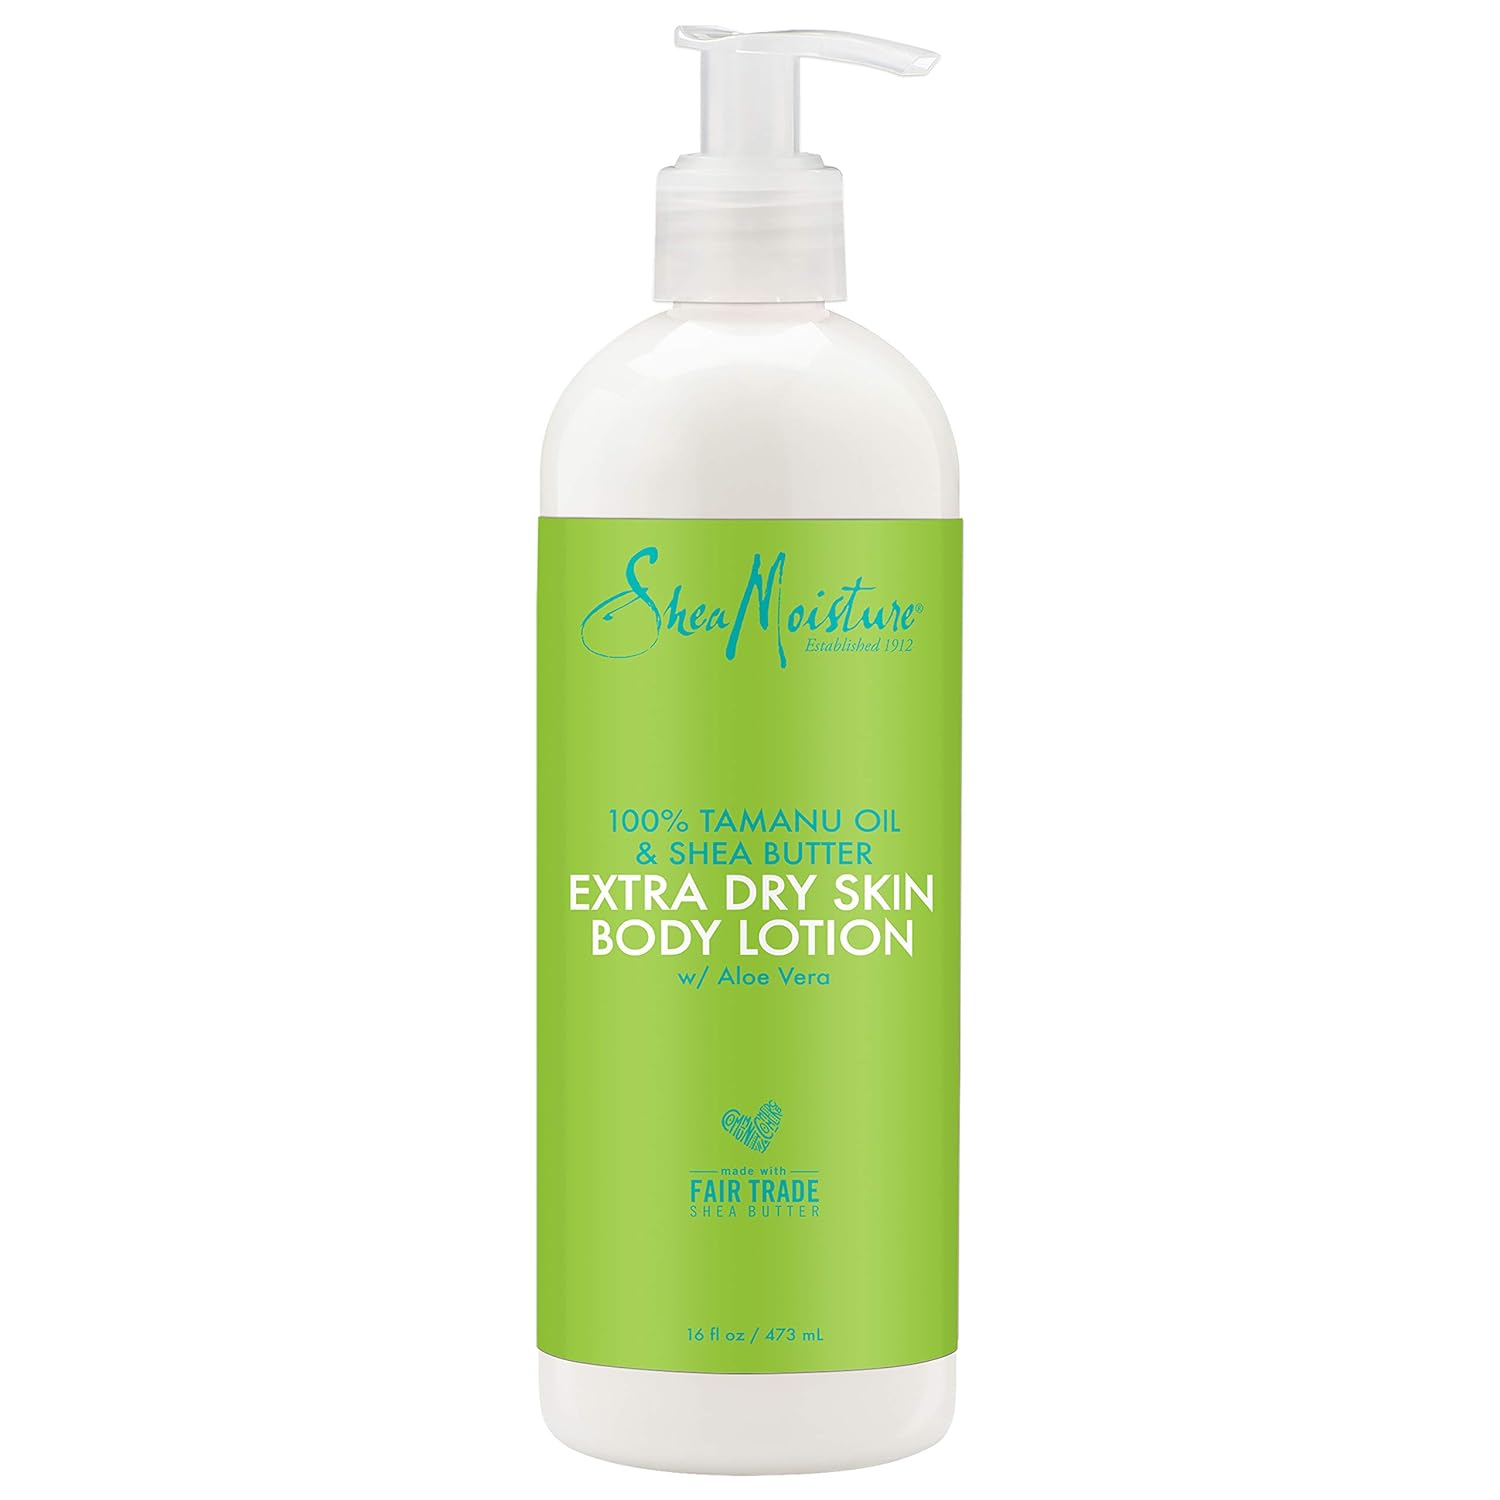 SheaMoisture Body Lotion 100% Tamanu Oil For Extra Dry Skin Body Lotion With Shea Butter 16oz